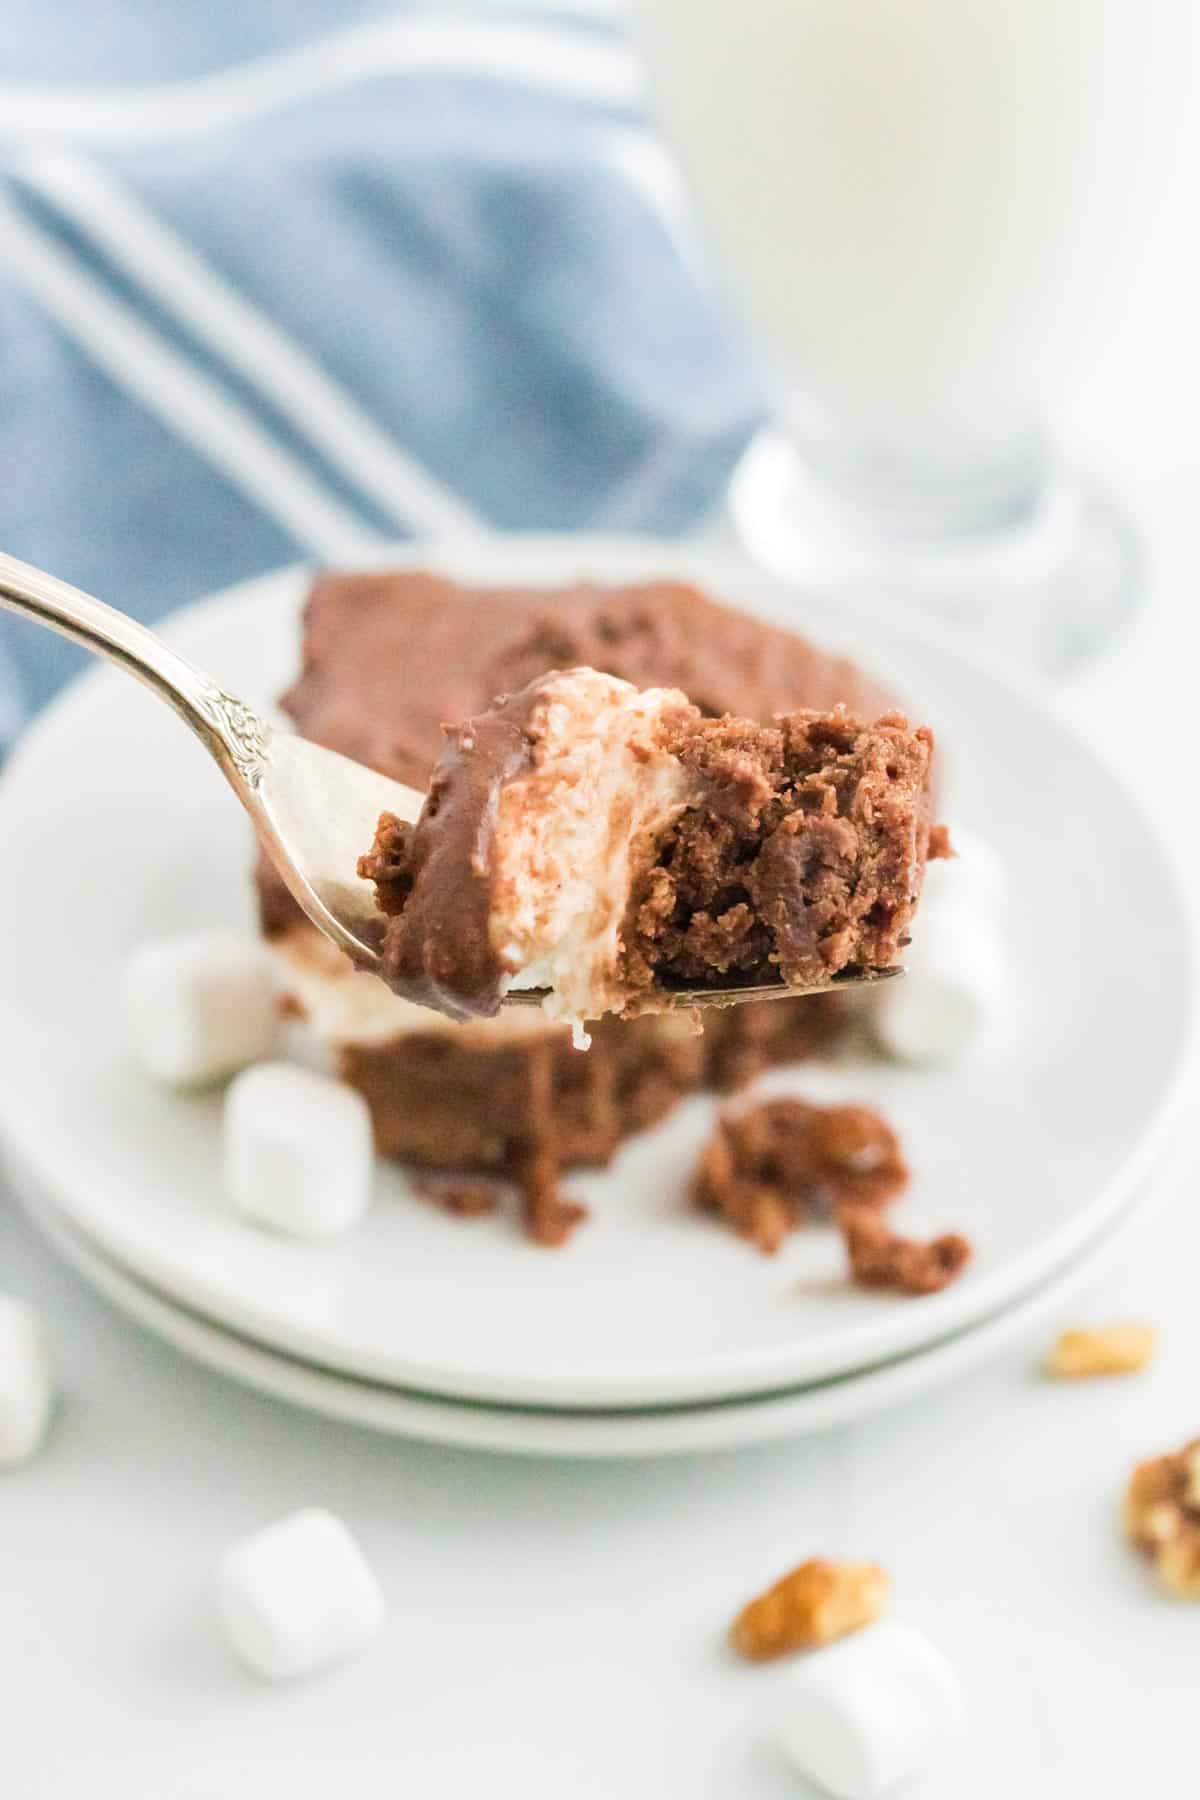 A bite of rocky road brownie on a fork.